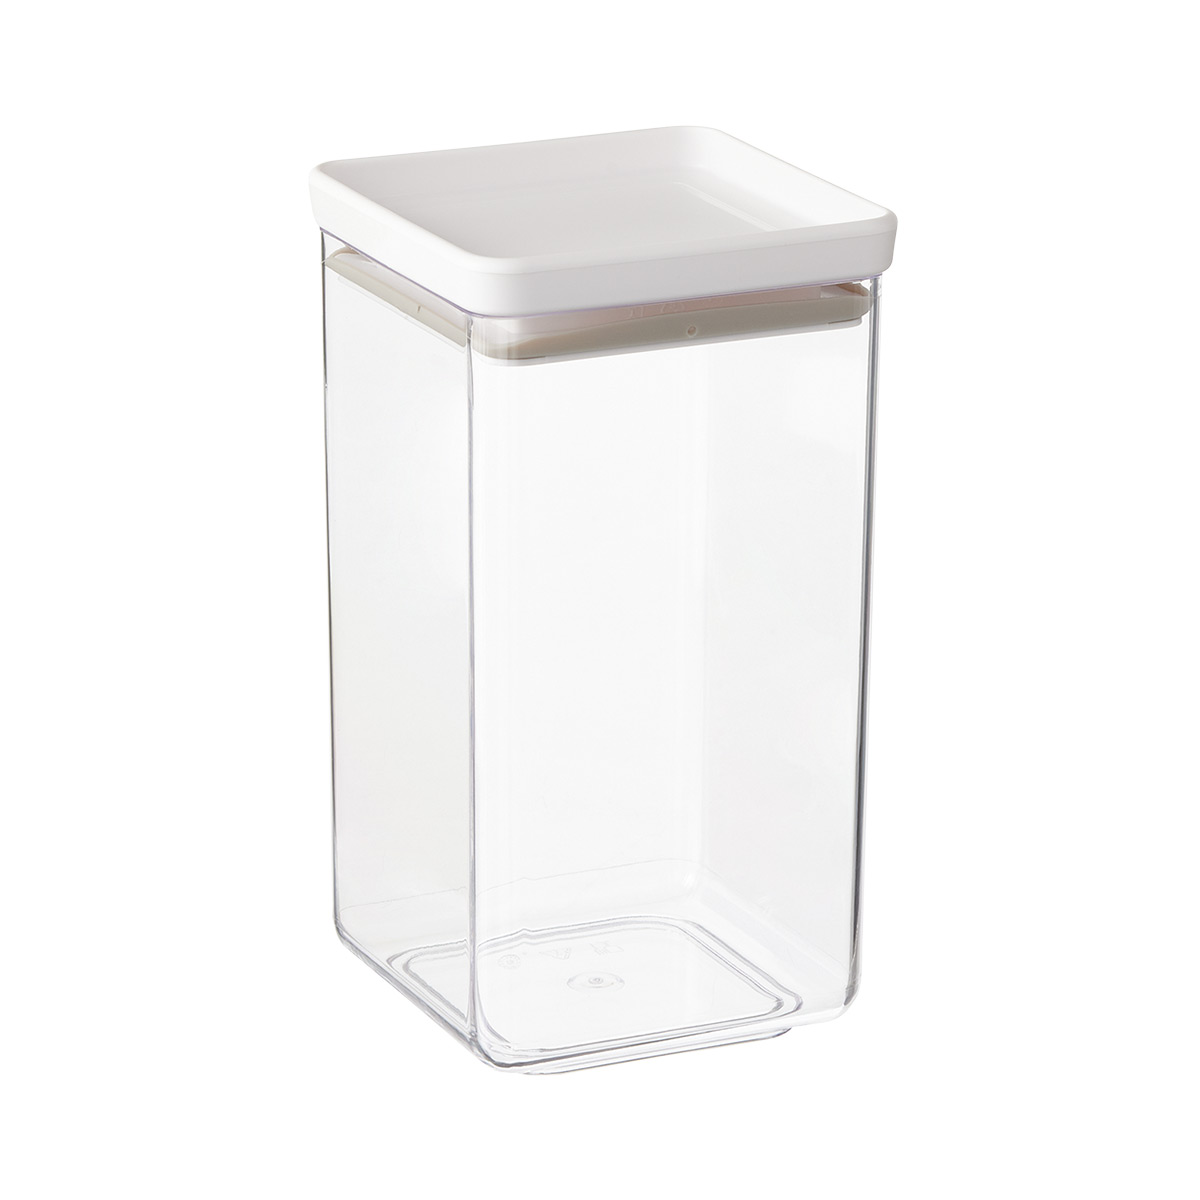 The Container Store Medium 1.7 qt. Modular Canister White